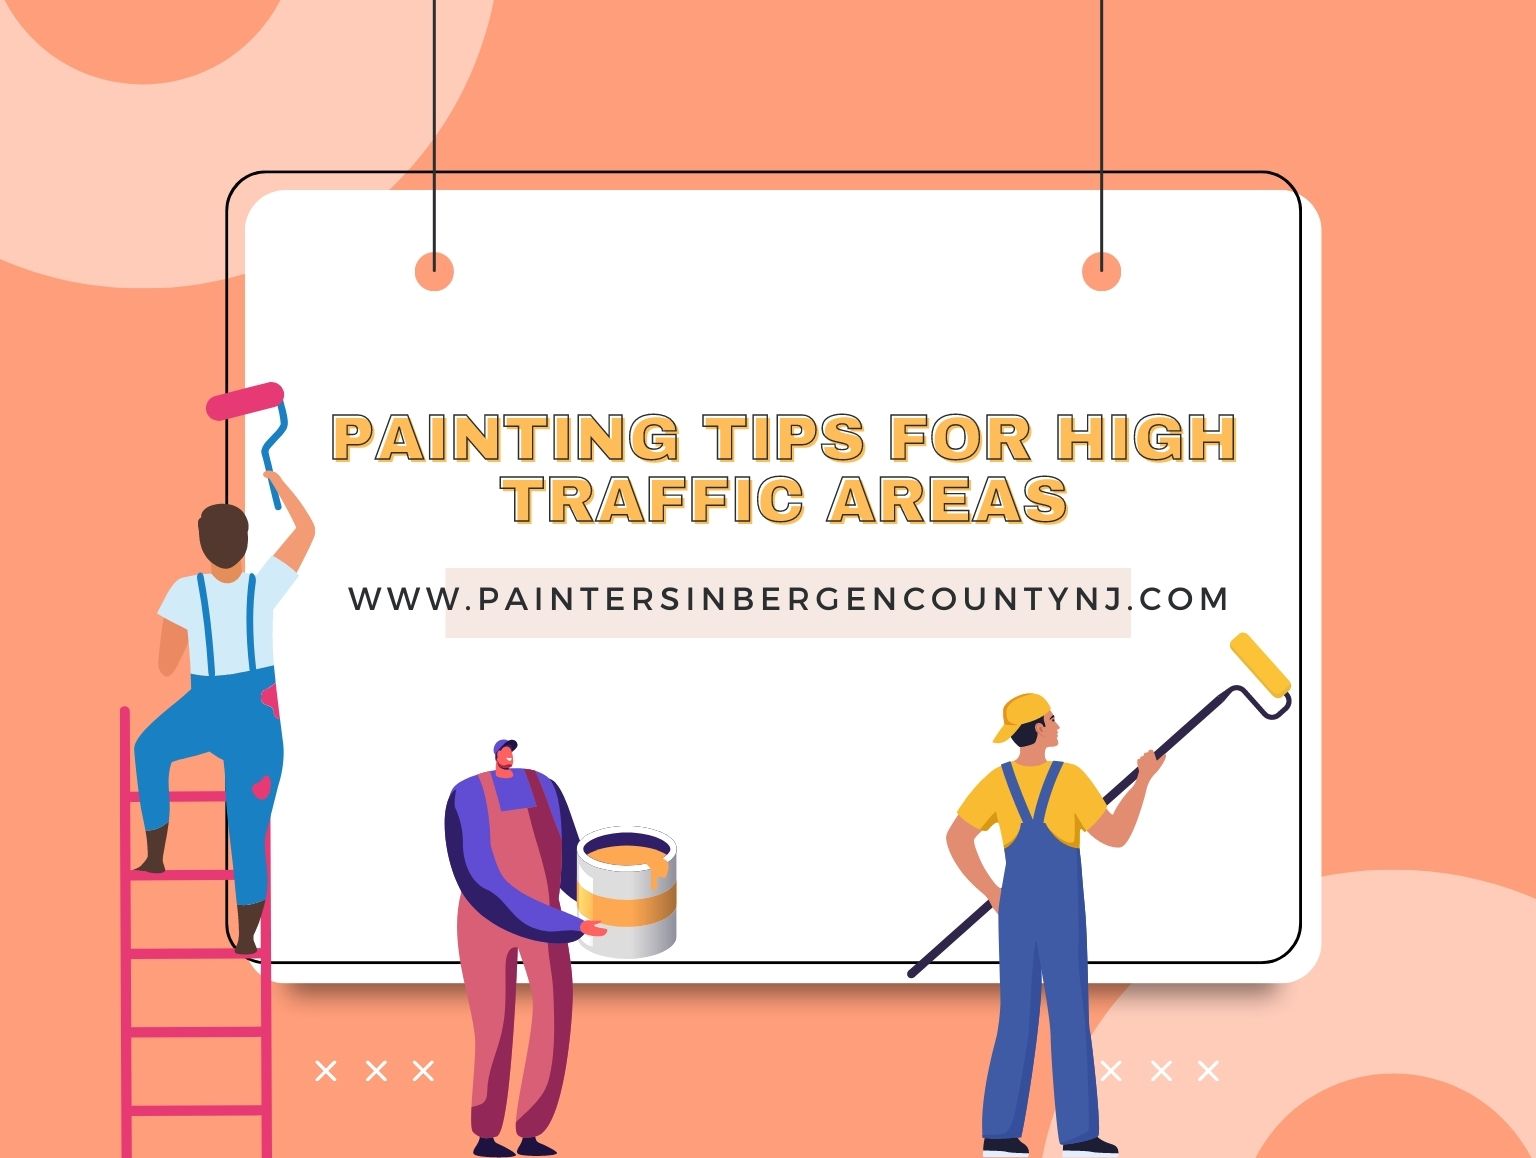 Painting Tips for High Traffic Areas